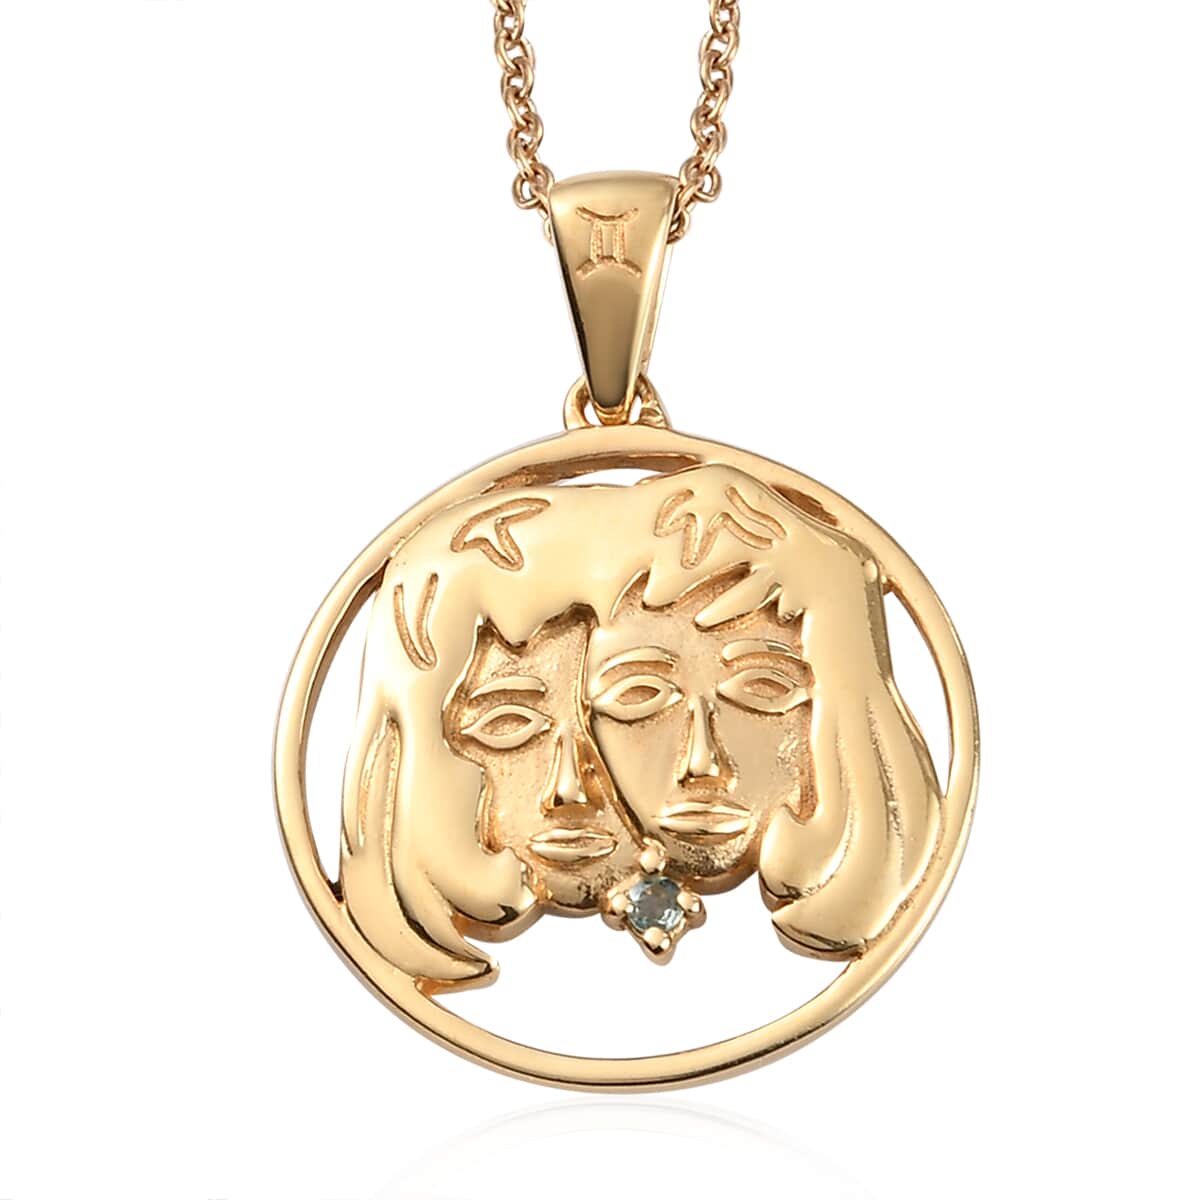 KARIS Narsipatnam Alexandrite Gemini Zodiac Pendant Necklace 20 Inches in 18K YG Plated and ION Plated Yellow Gold Stainless Steel image number 0